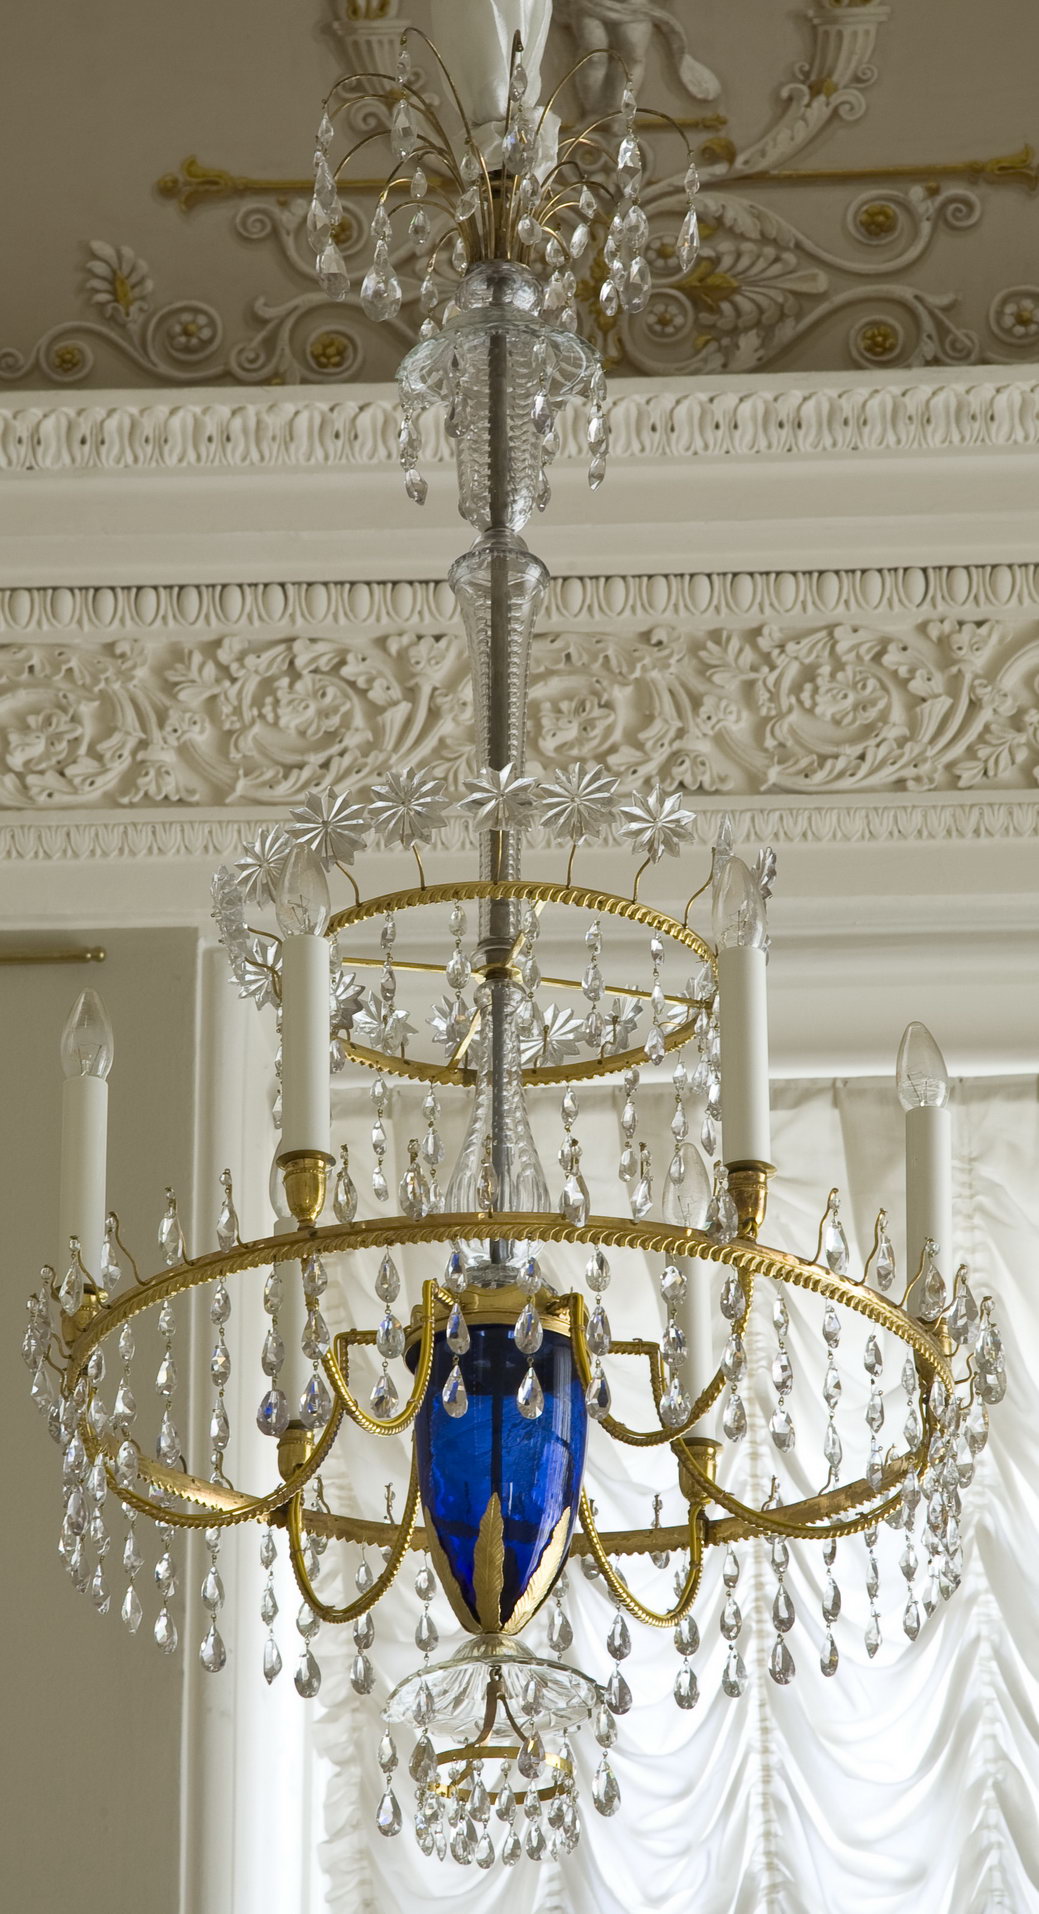 Chandelier with gilding in the interior